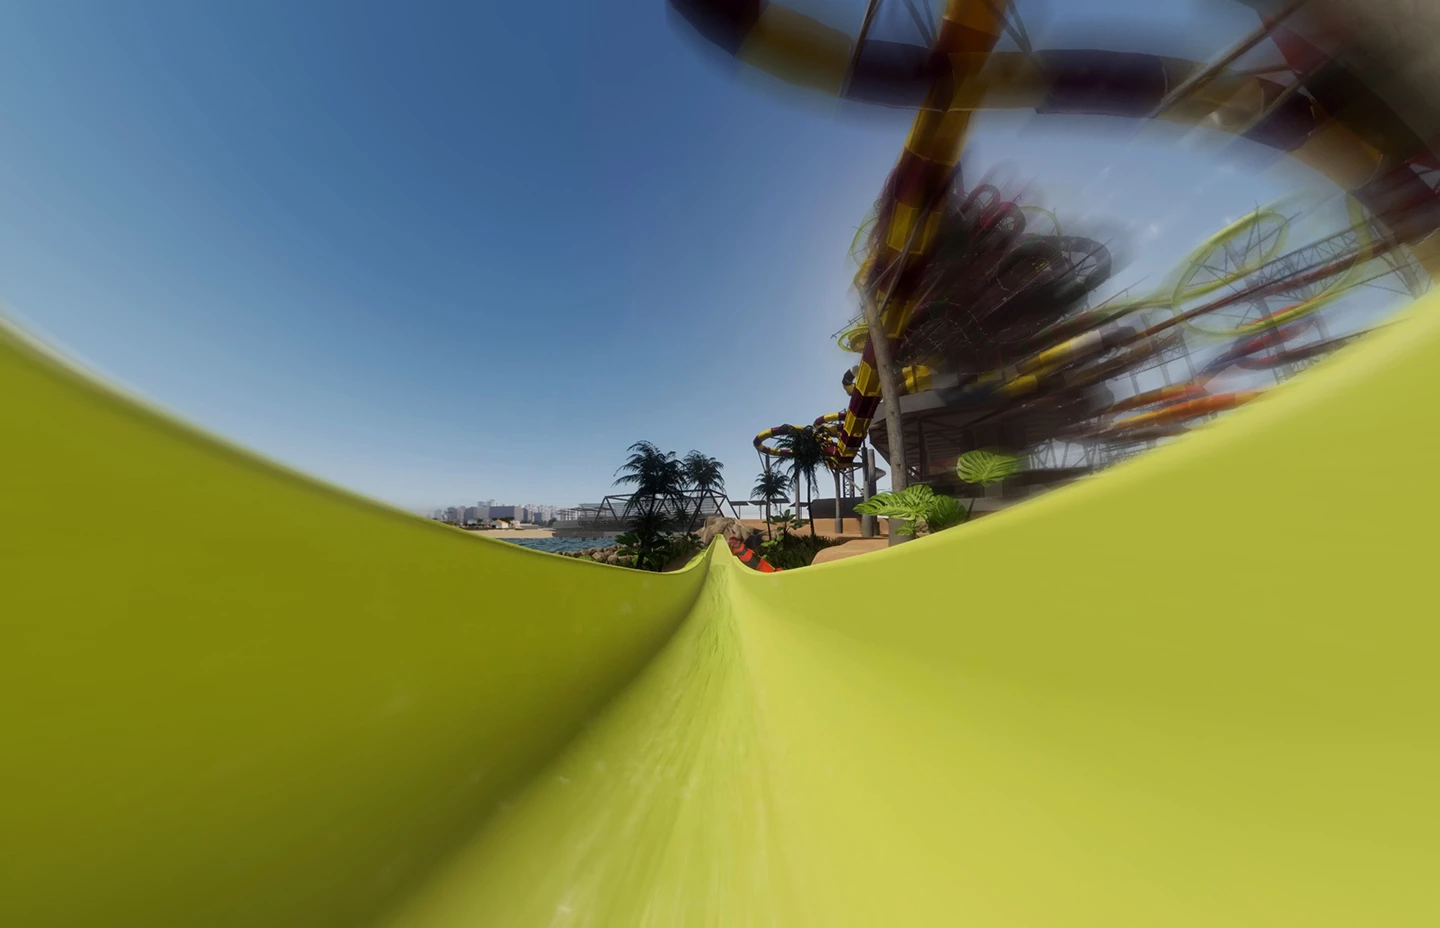 A POV shot of a waterslide